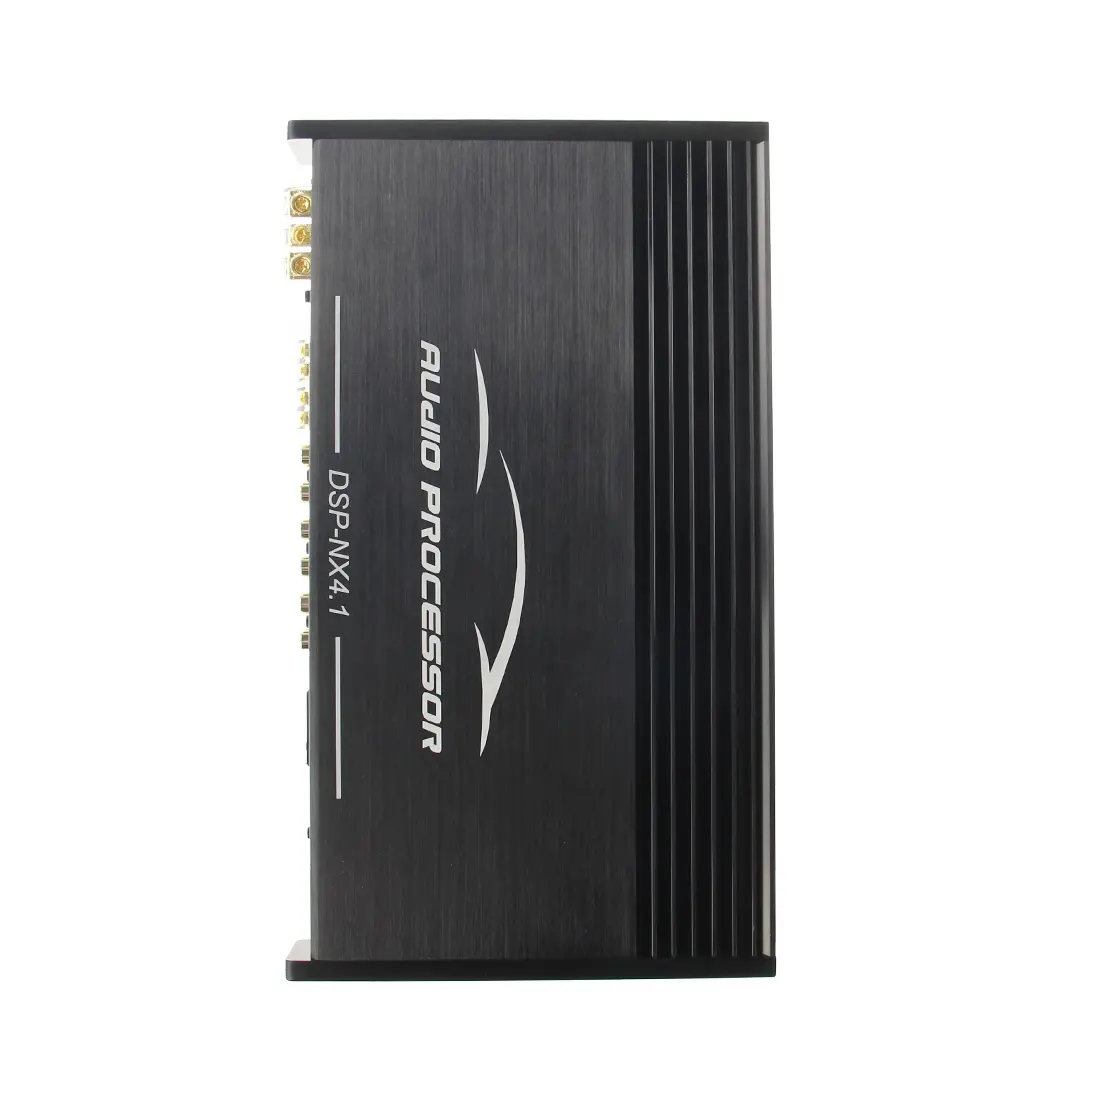 New Style DC 11V~17V 4 Channel Class AB Car Stereo Power Amplifier, Car Audio Amplifier